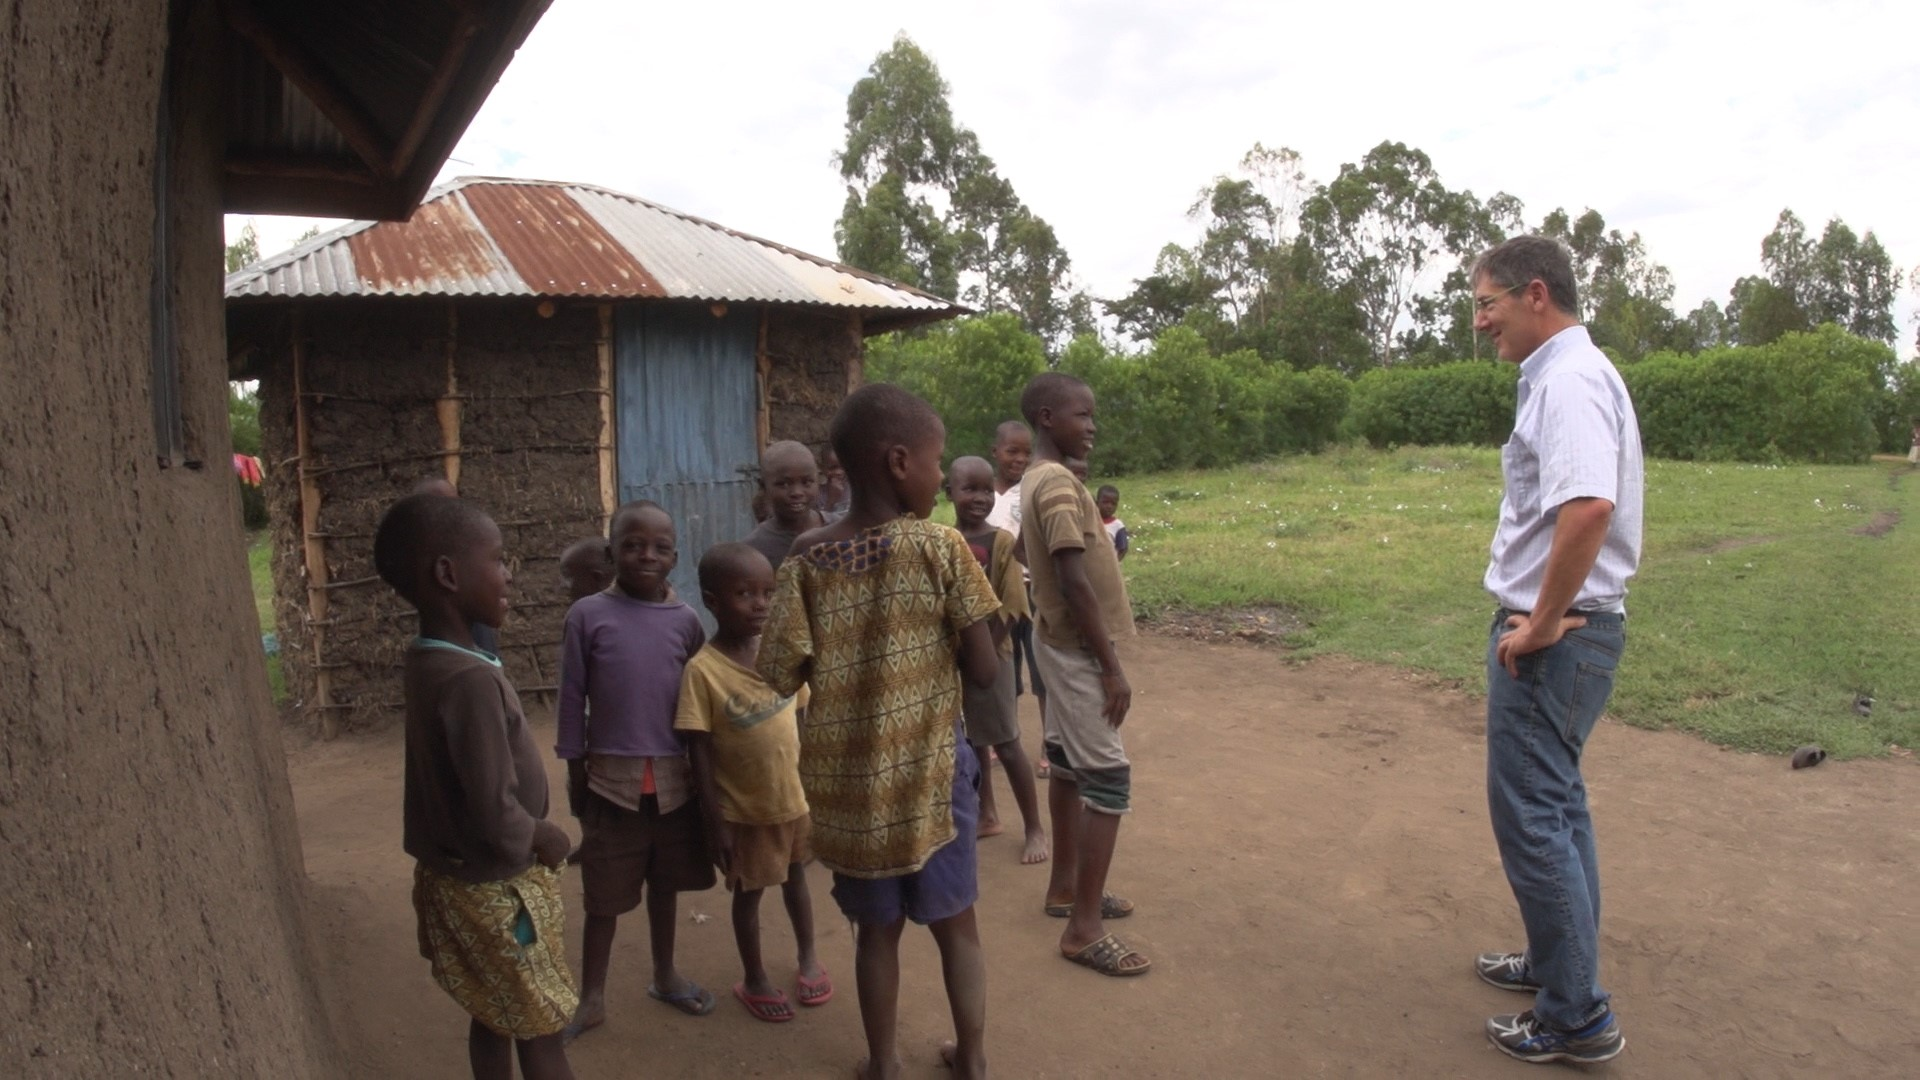 Dr. Jonathan Kurtis talks with a group of children in a rural village.